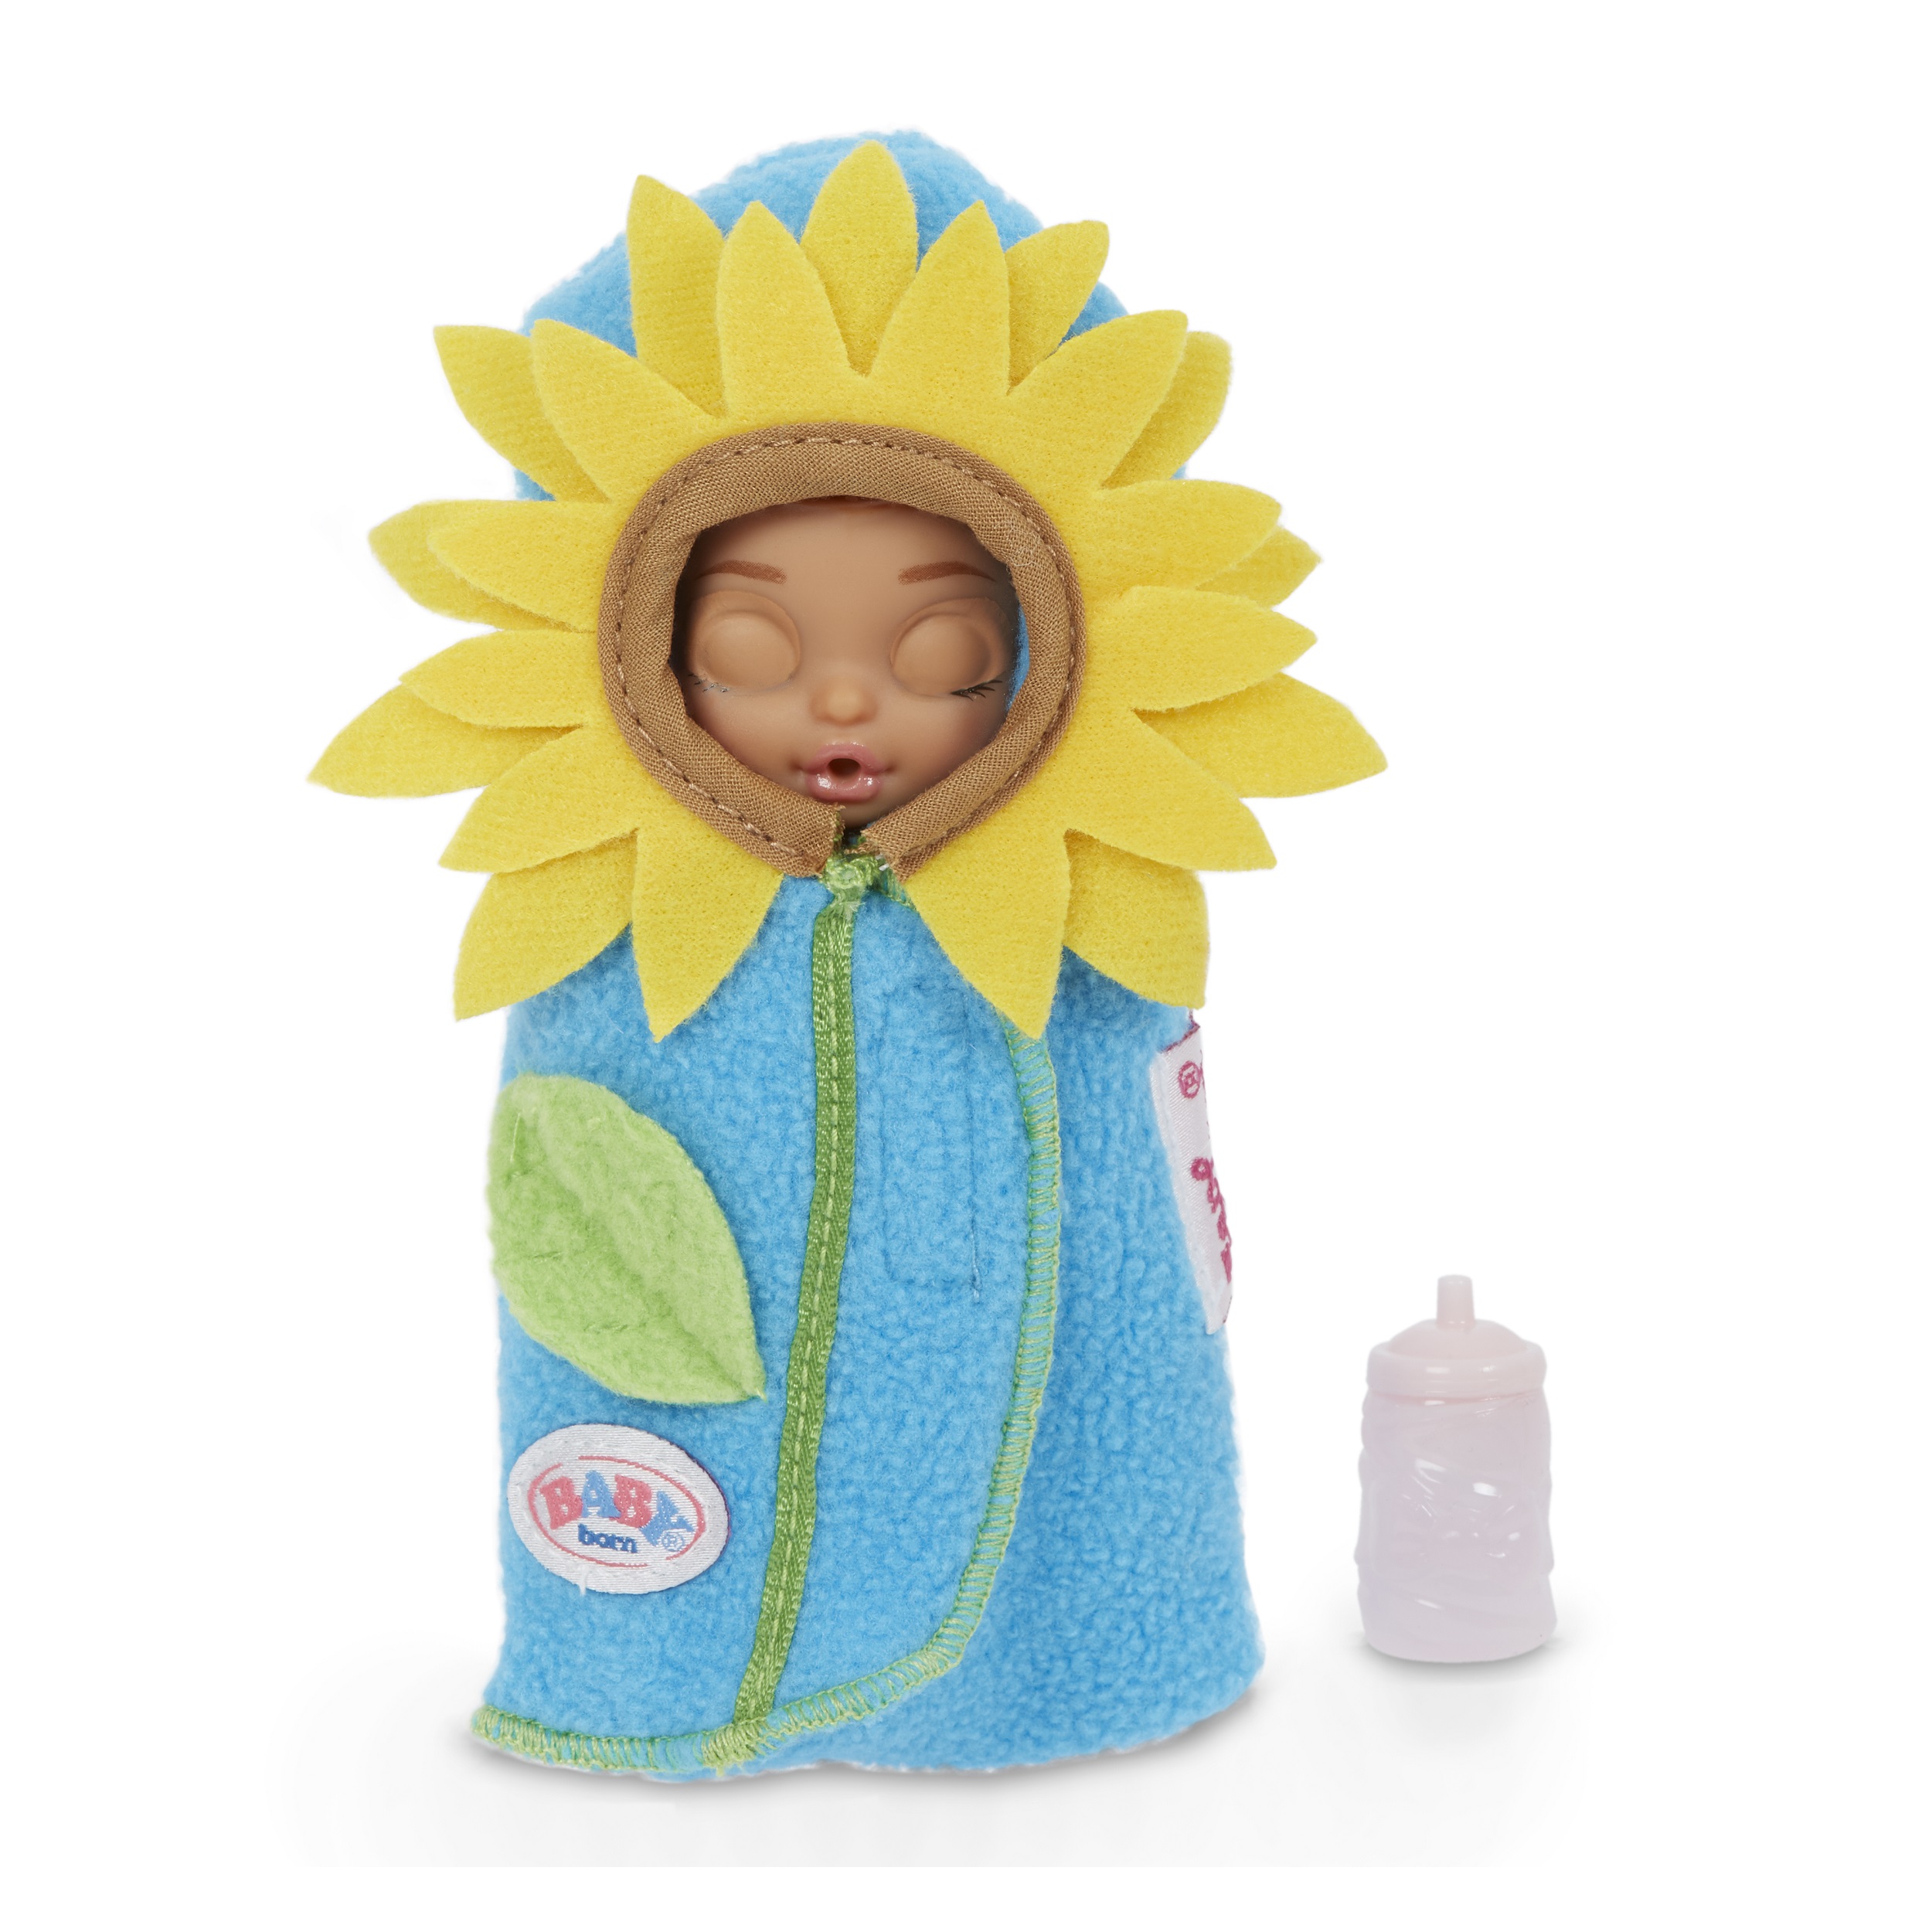 Baby Born Surprise Series 2-1 Collectible Babies with Color Change - image 6 of 6